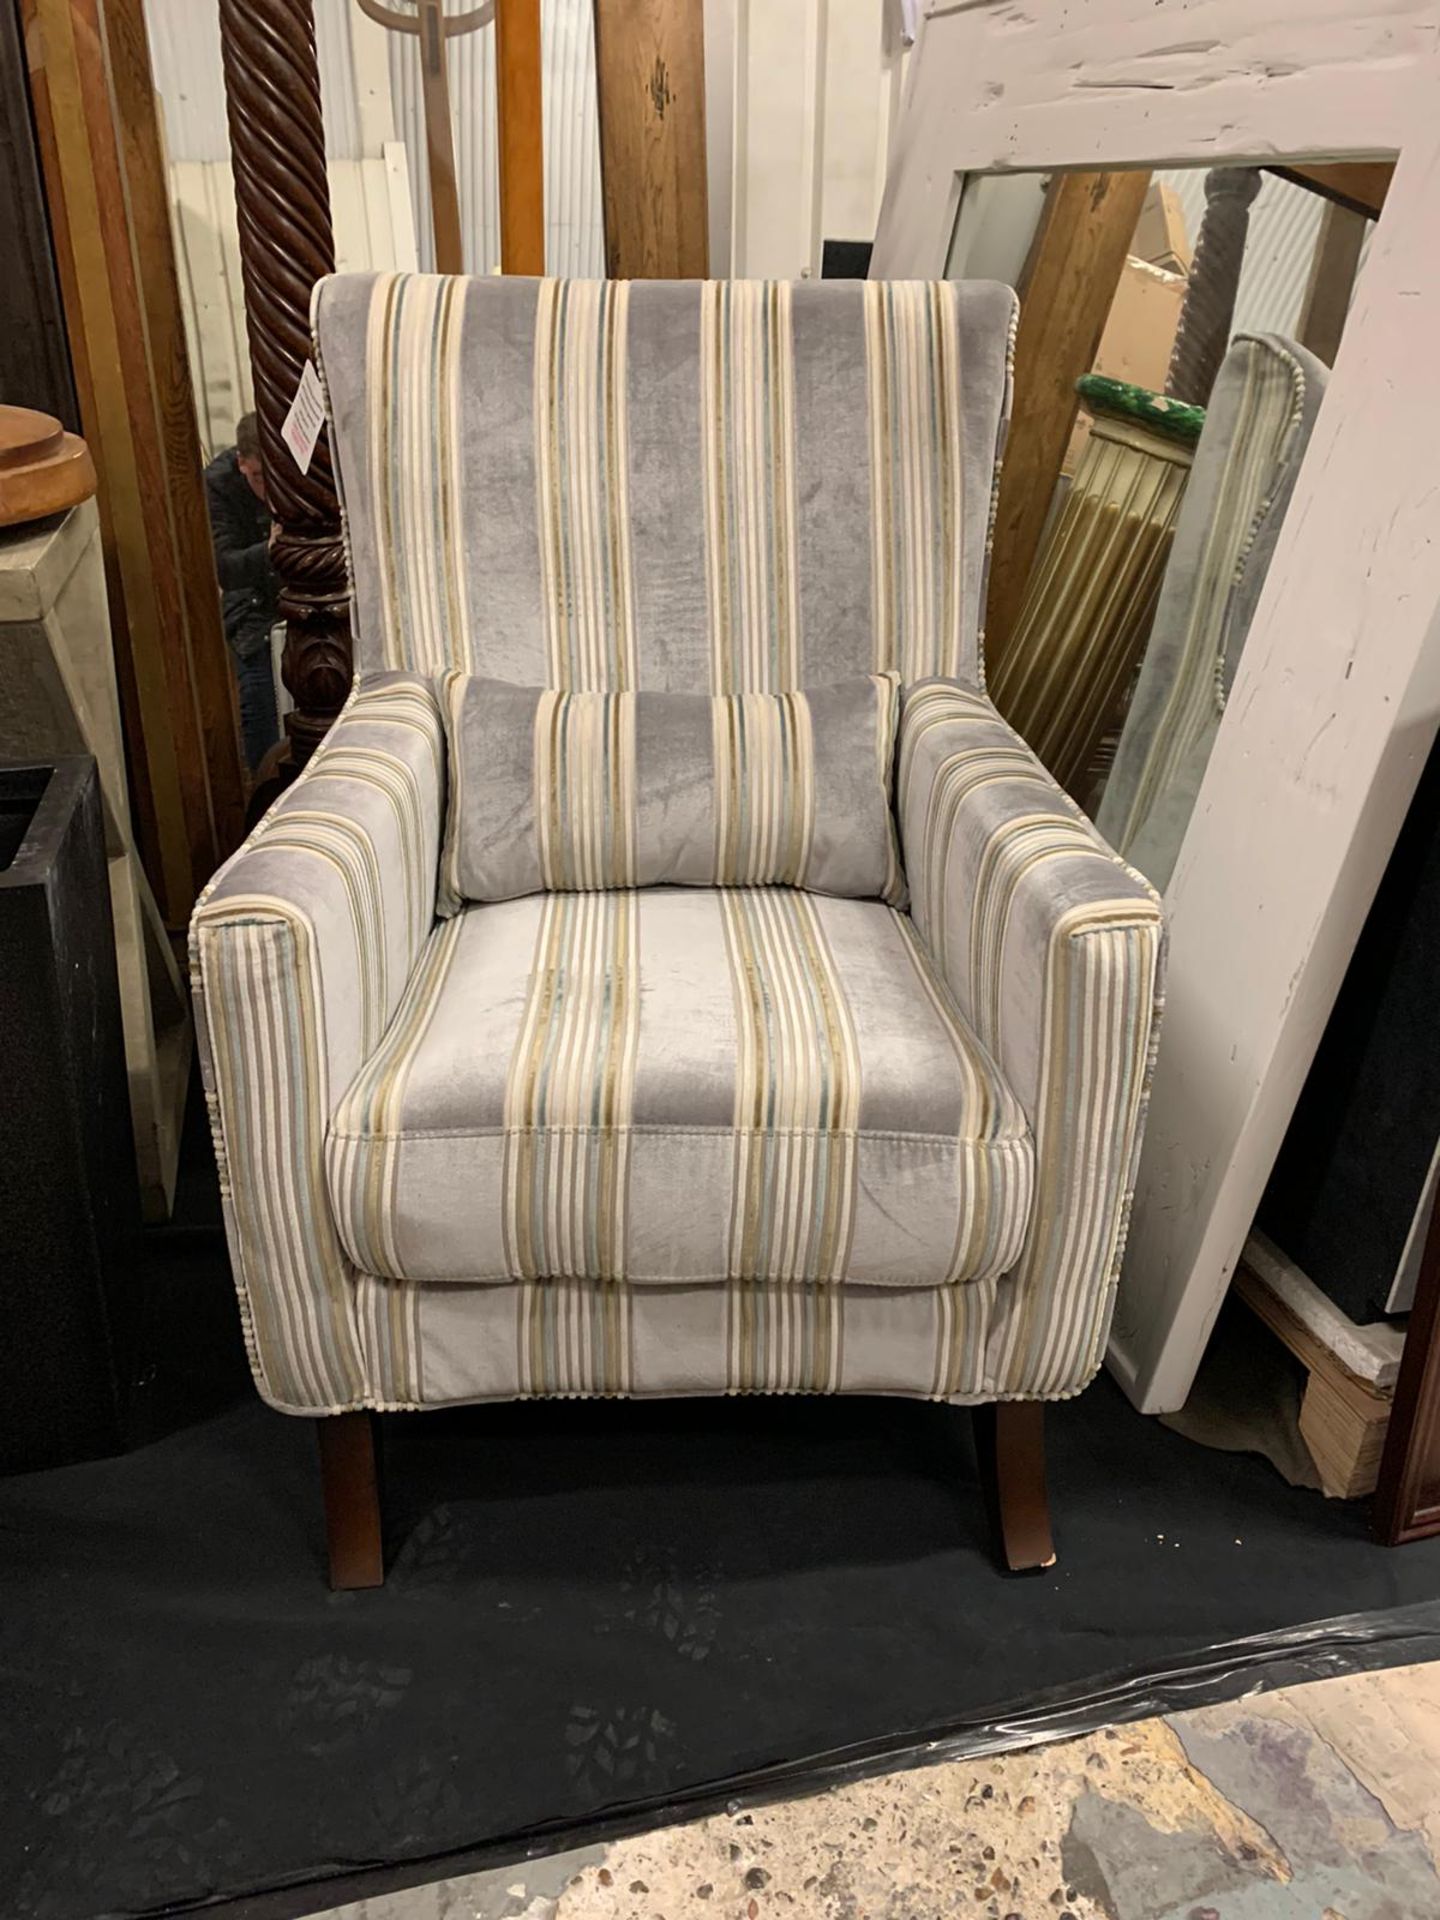 Hubbardston Armchair Grey Velvet Capture The Rolling Hills And Timeless Charm Of The English - Image 3 of 4